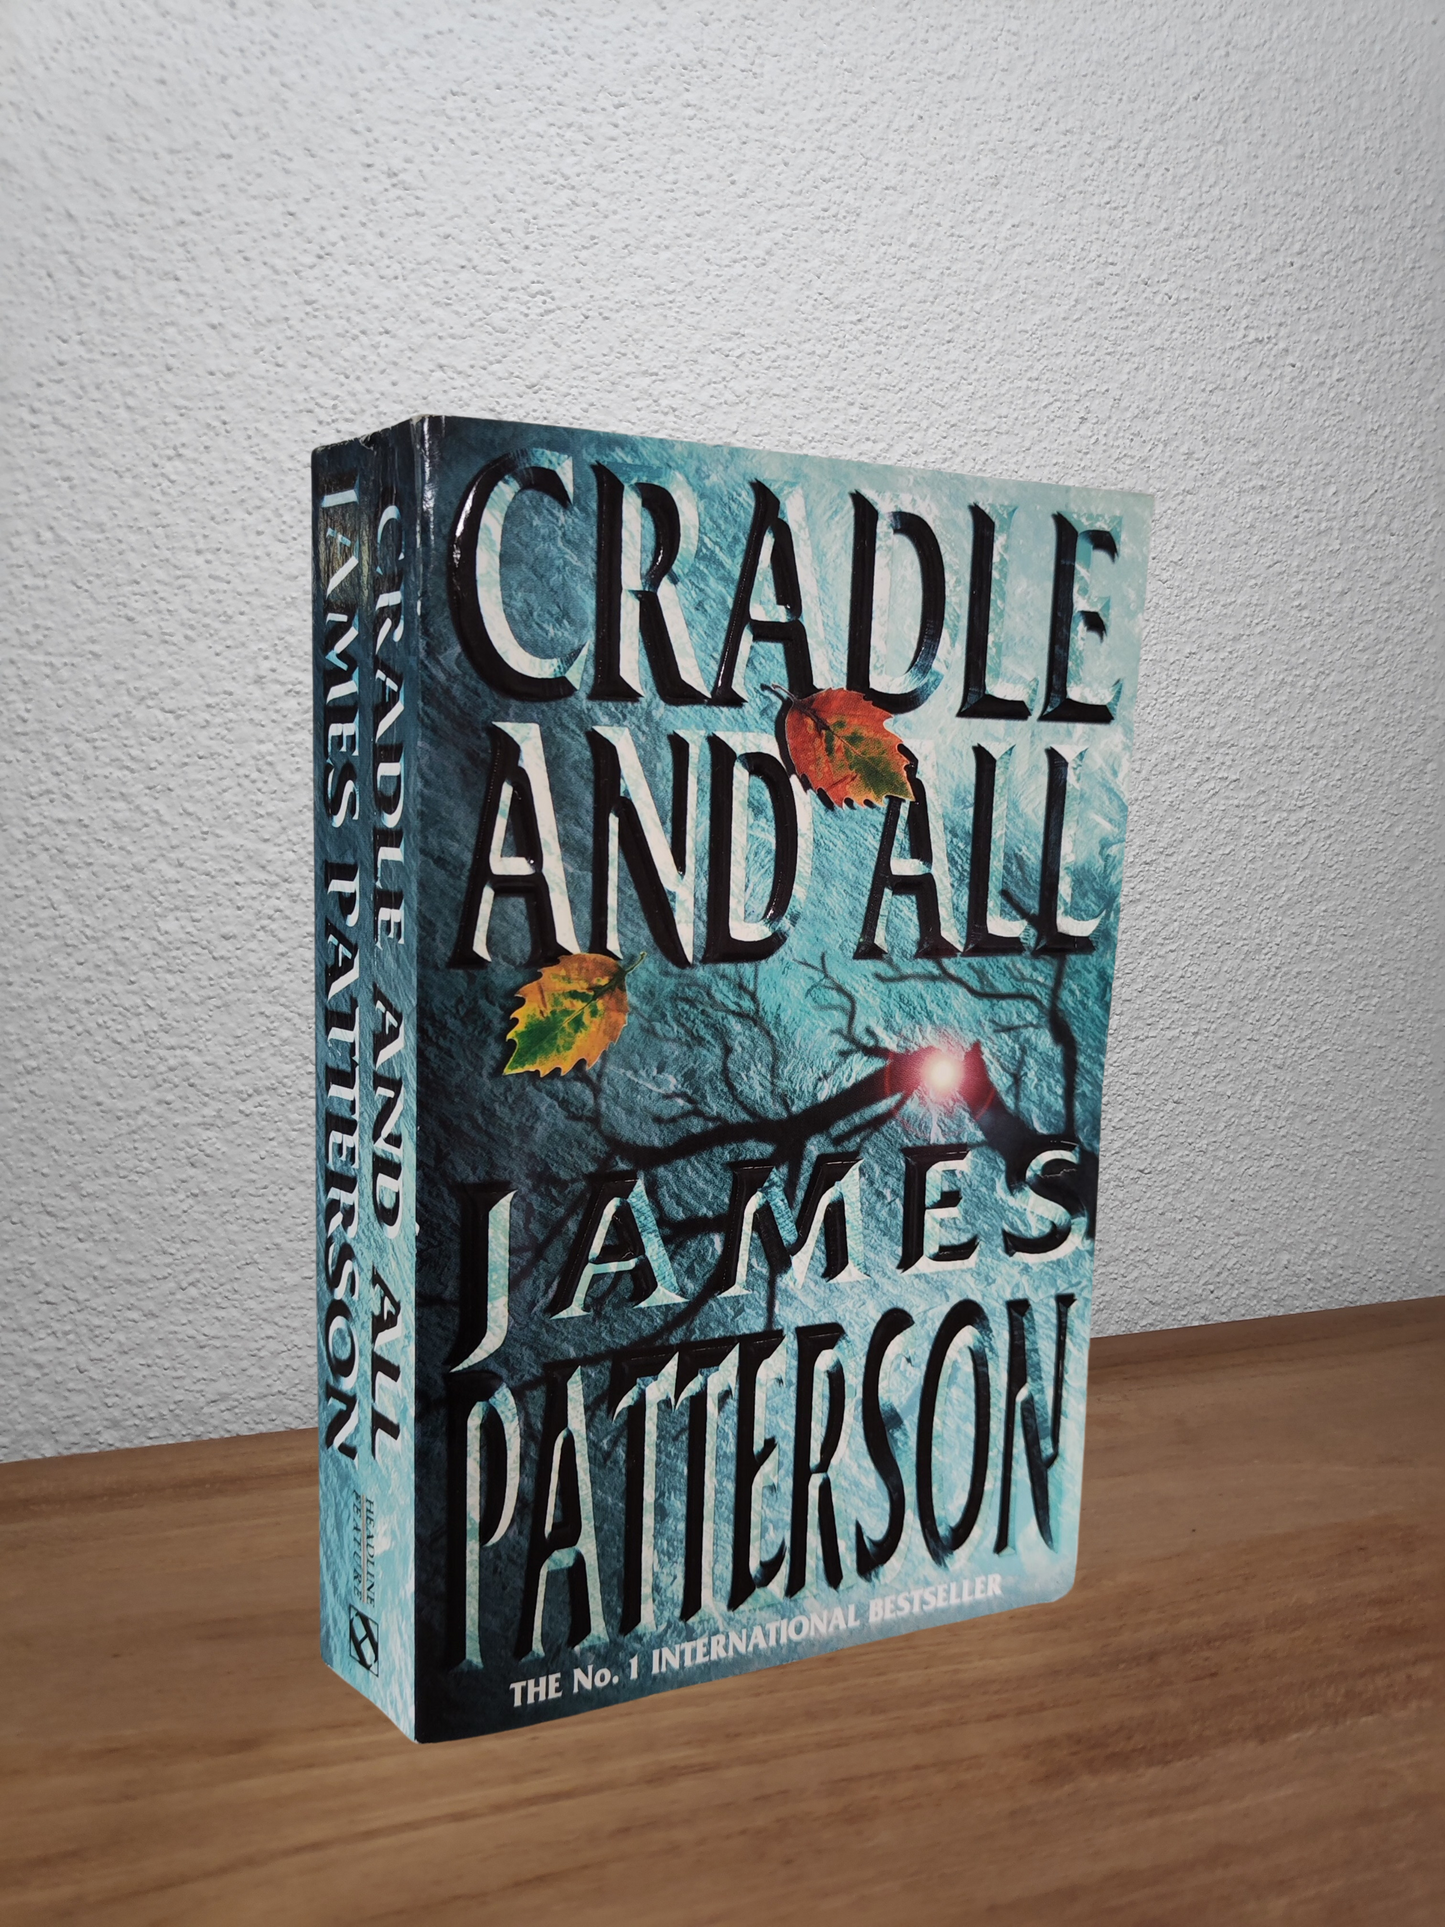 James Patterson - Cradle and All